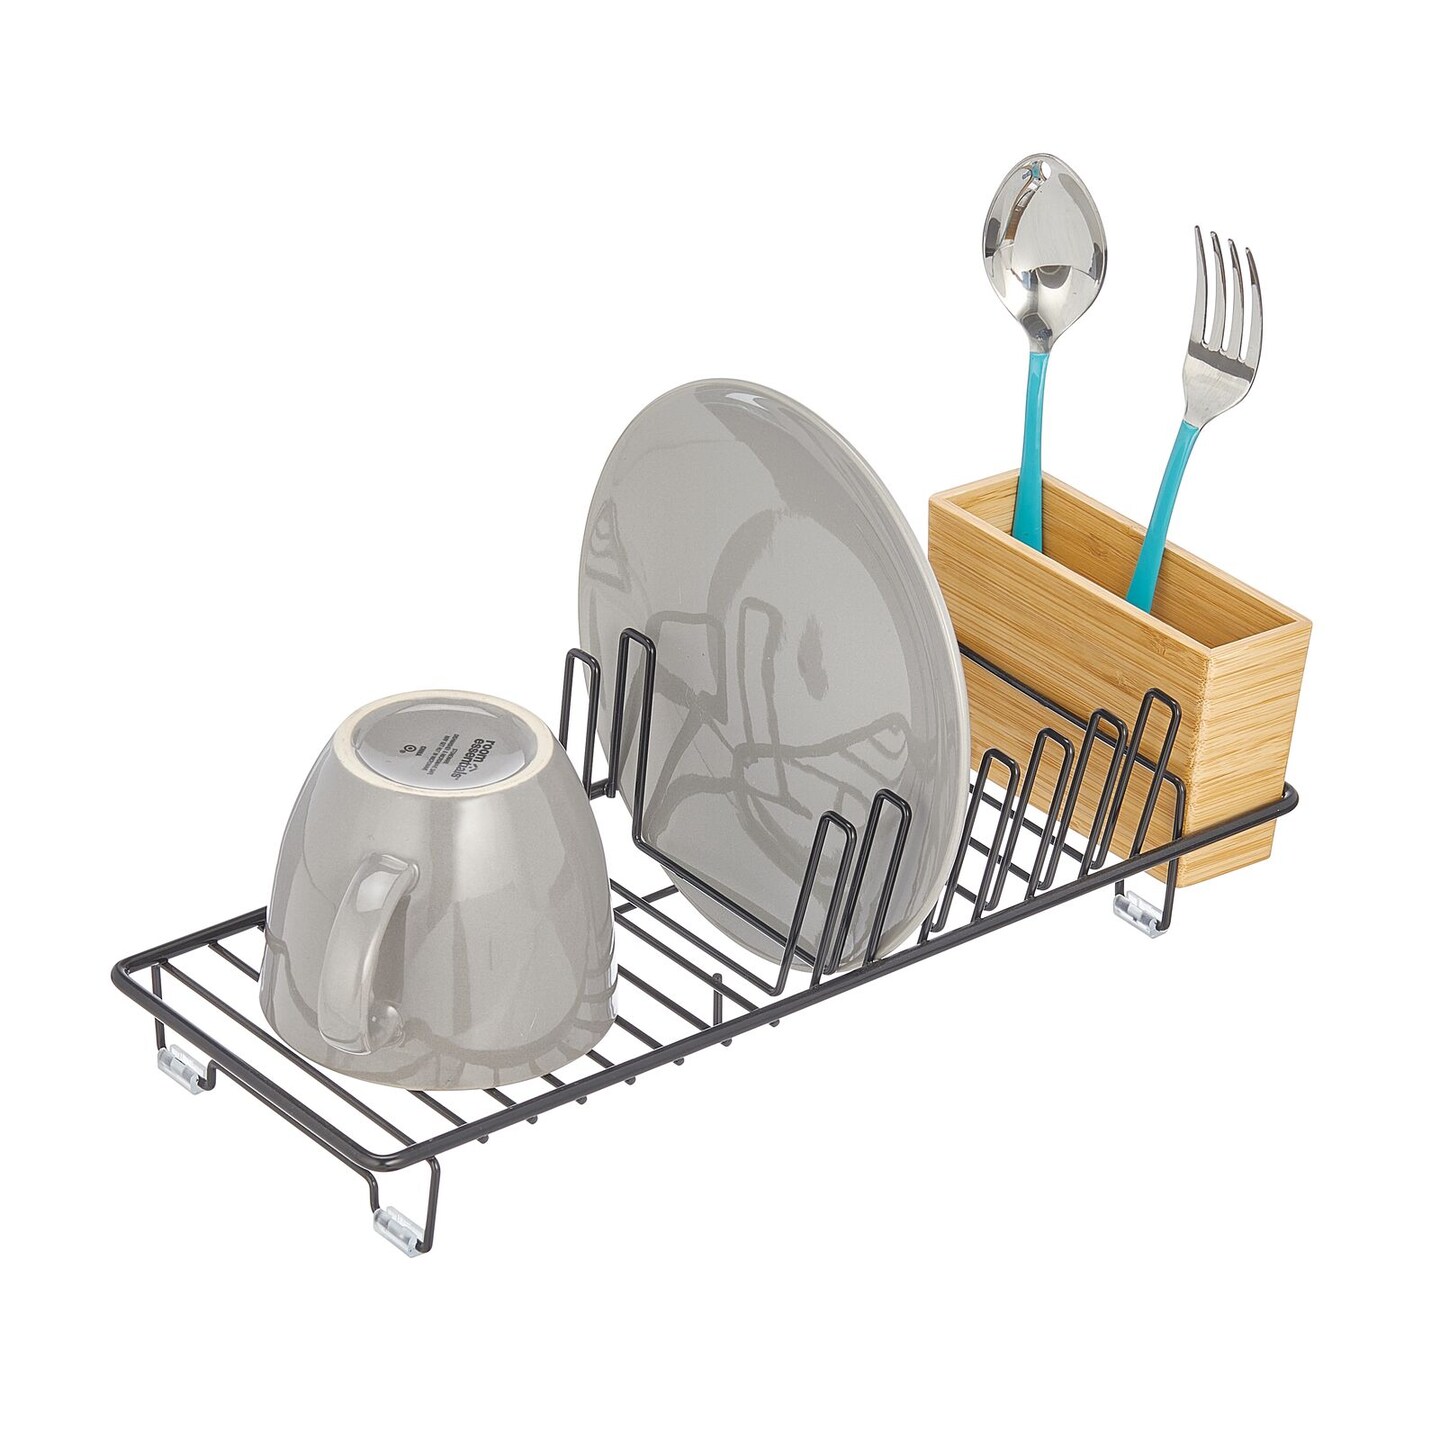 2-Tier Small Stainless Steel Compact Dish Drying Rack For